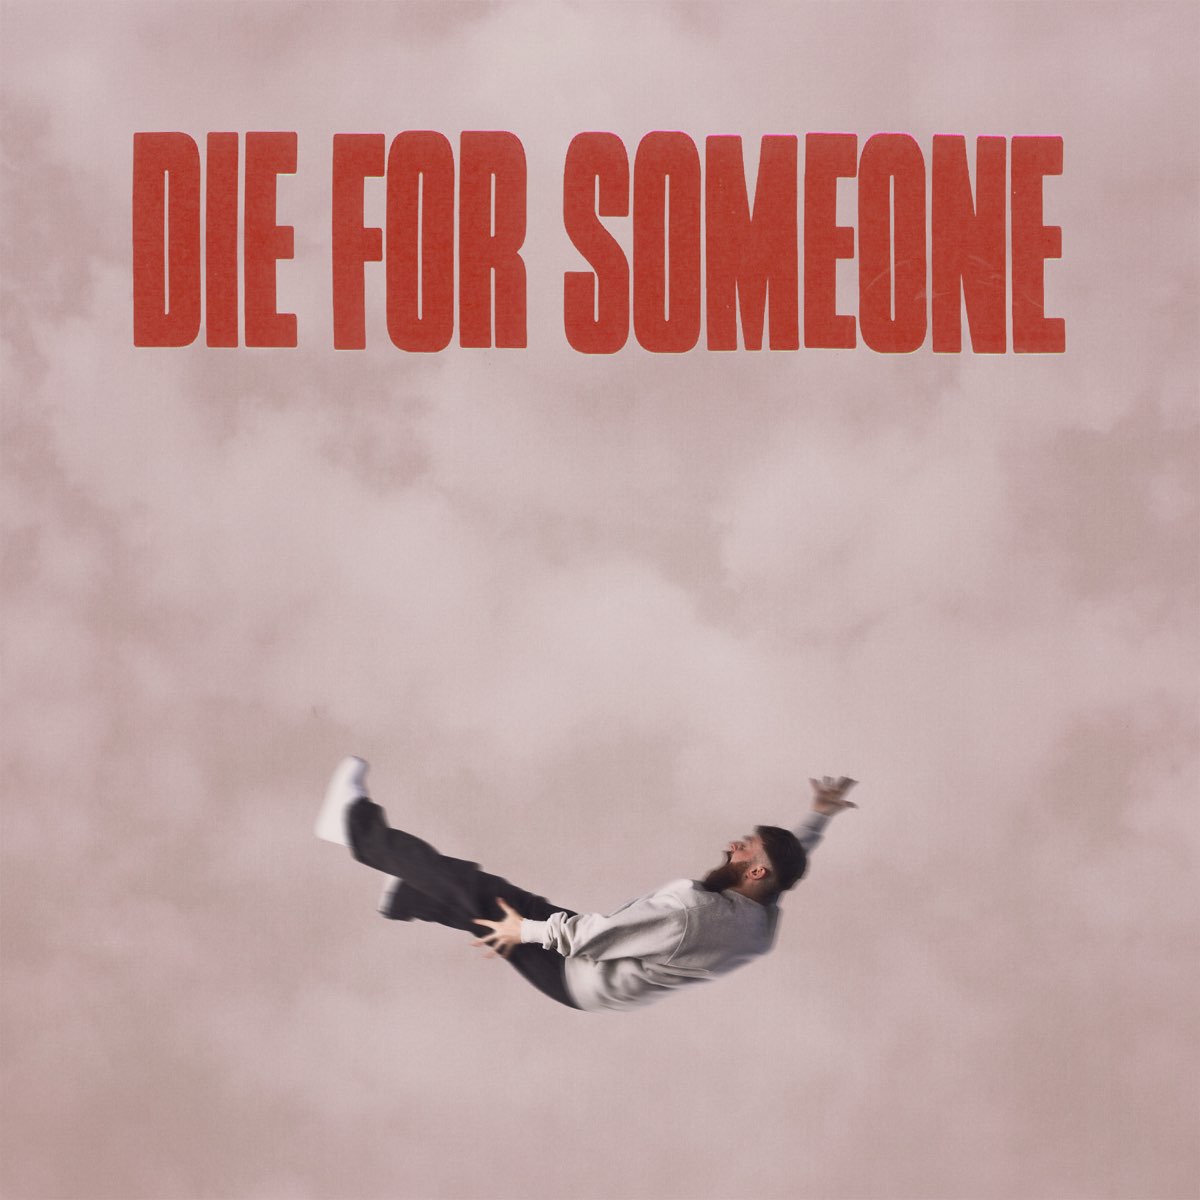 Sam Tompkins Will “Die For Someone”